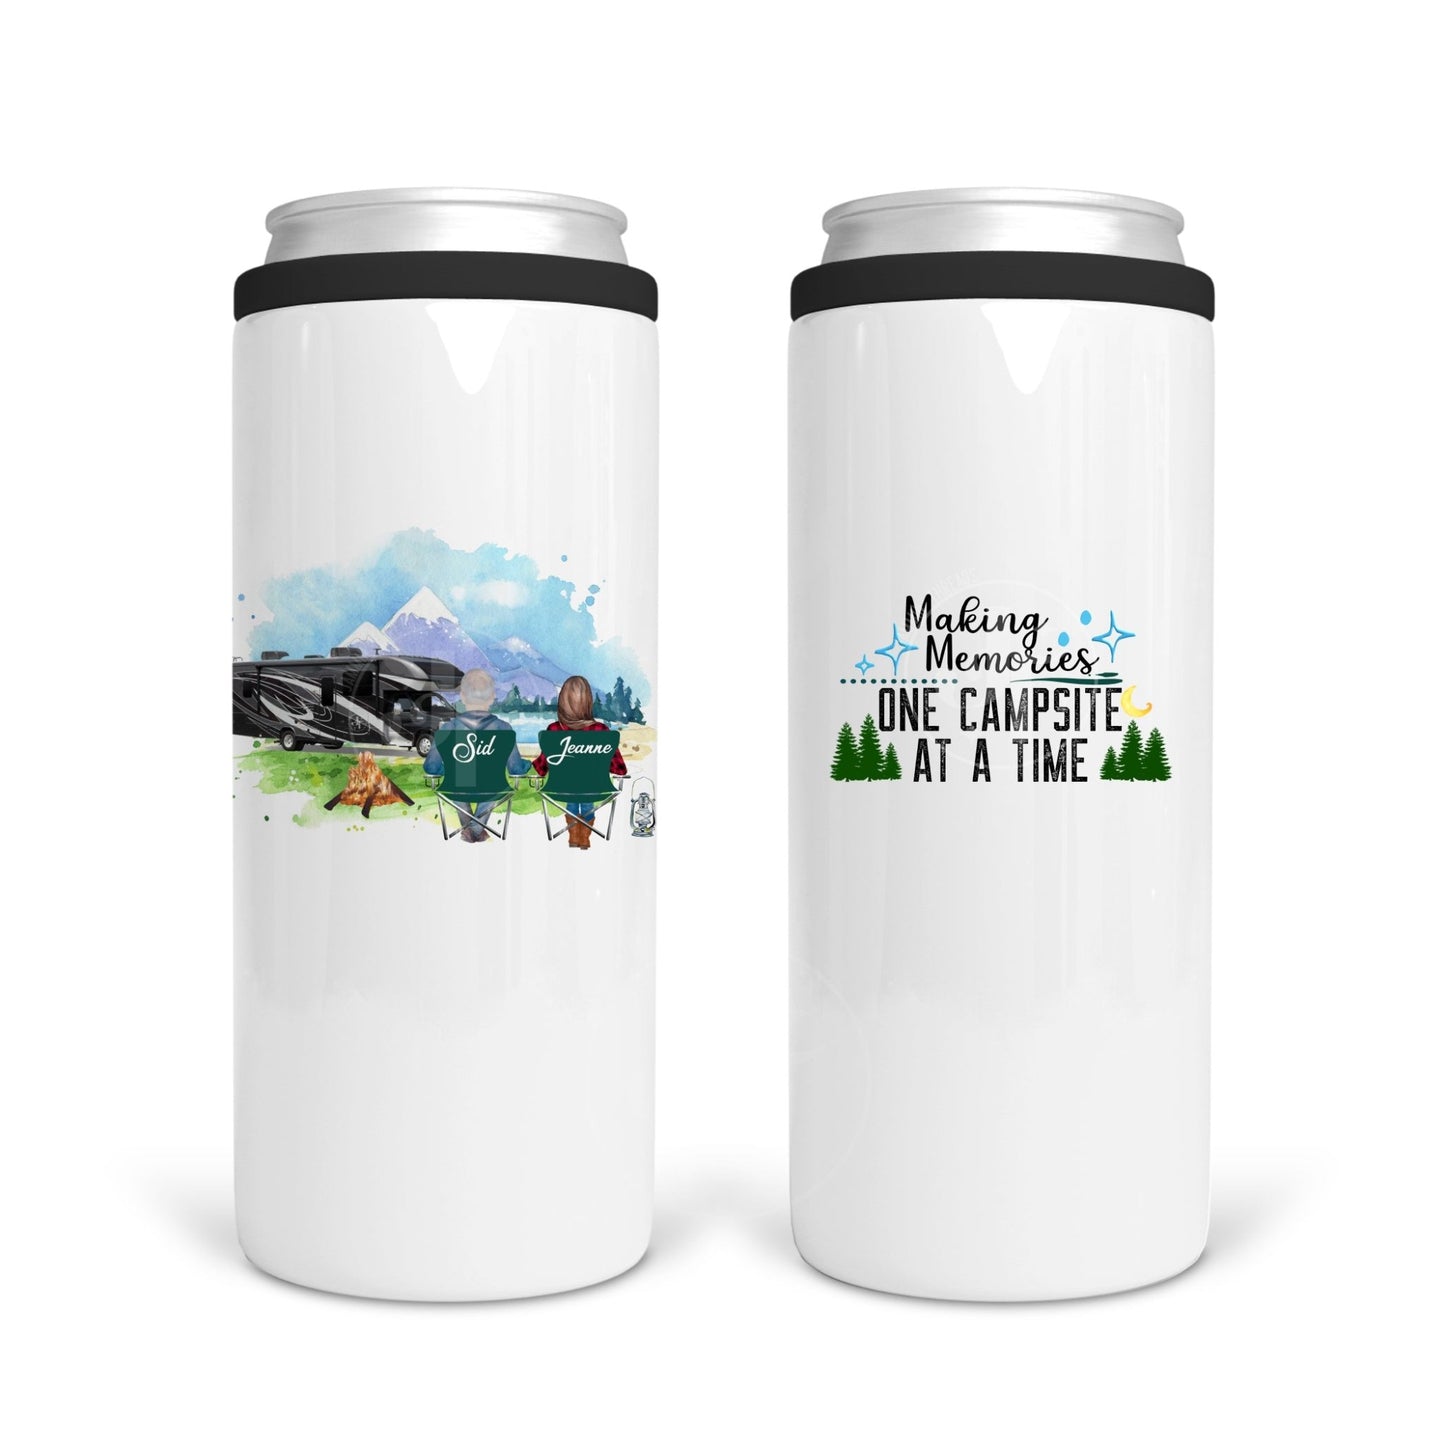 Making Memories One Campsite at a time - Customized Class C Mug - Jammin Threads